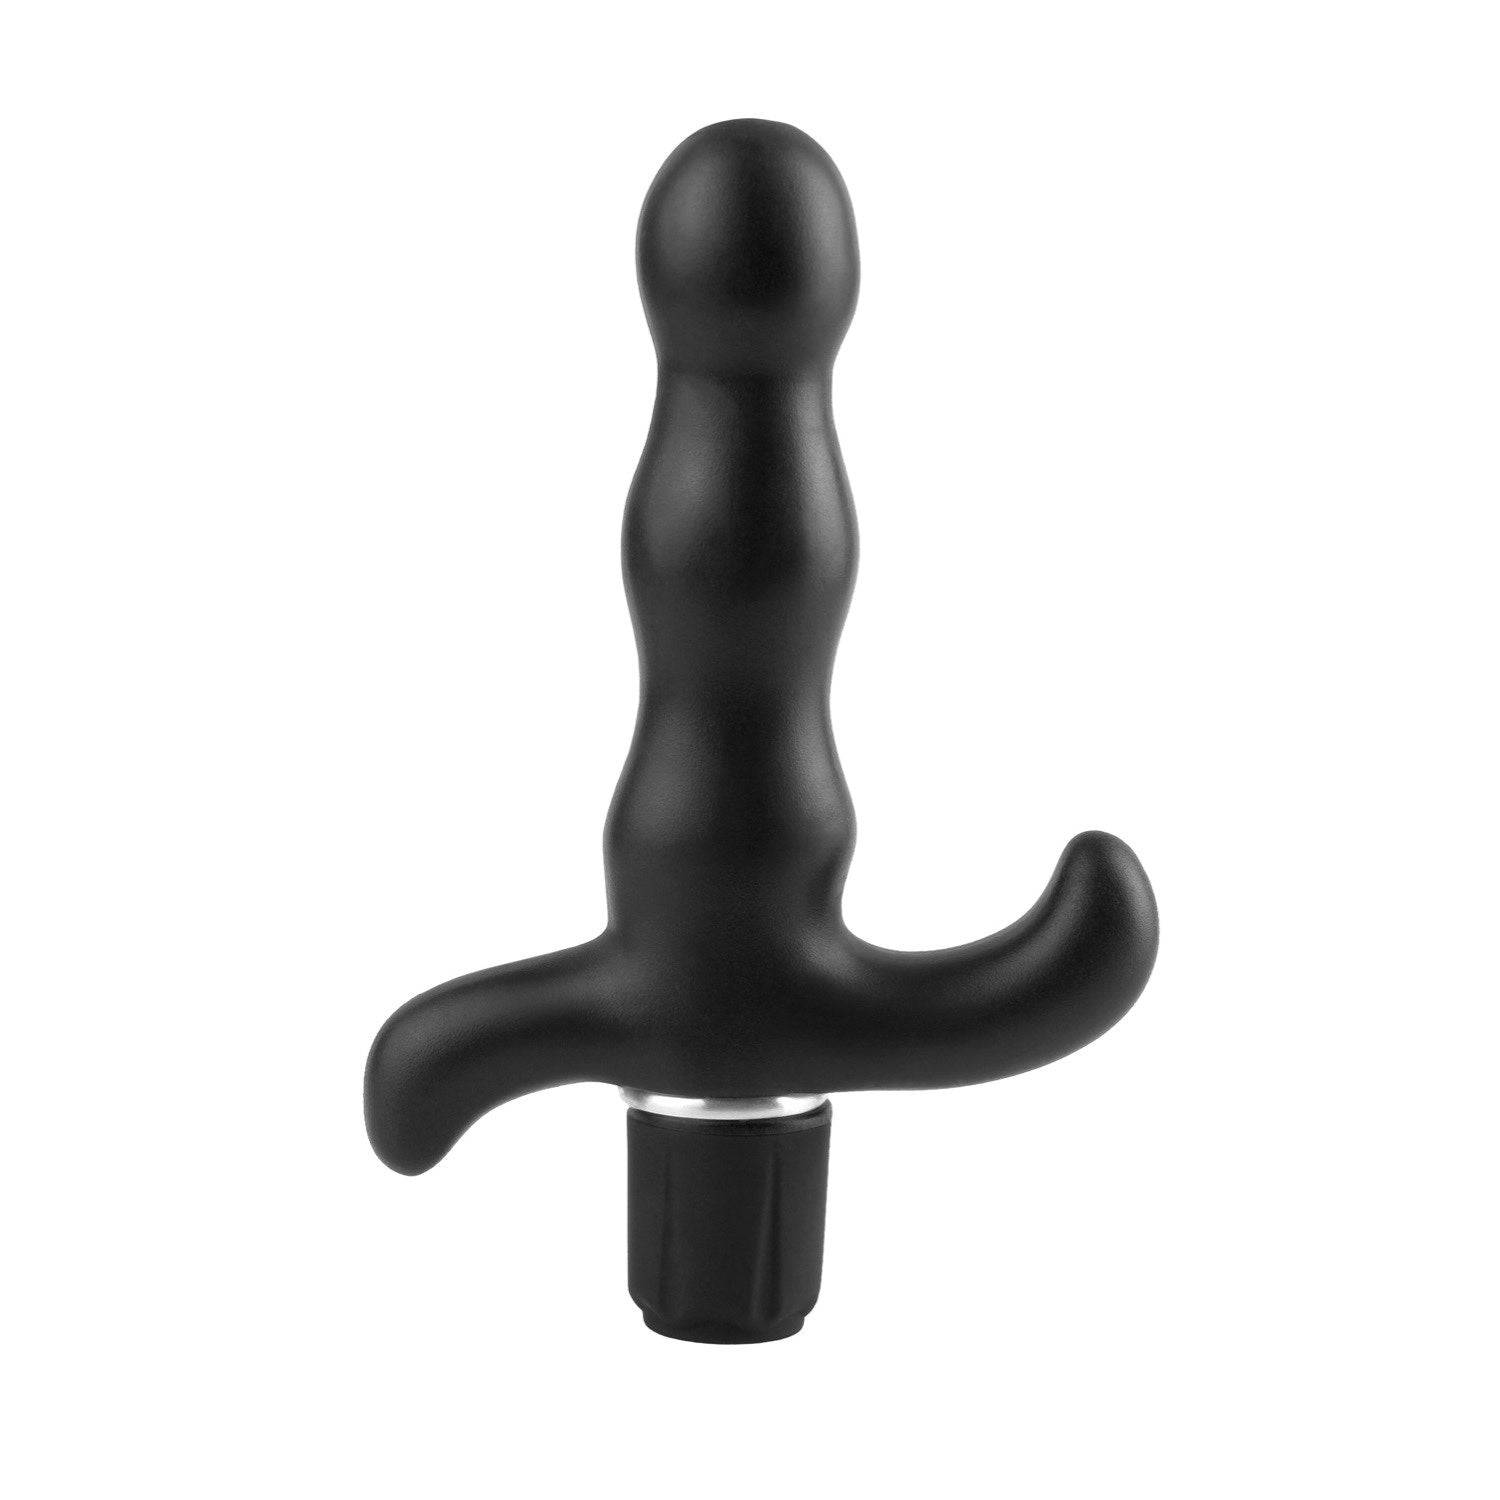 Anal Fantasy Collection 9-function Prostate Vibe - Black 11.4 cm (4.5&quot;) Vibrating Prostate Massager by Pipedream